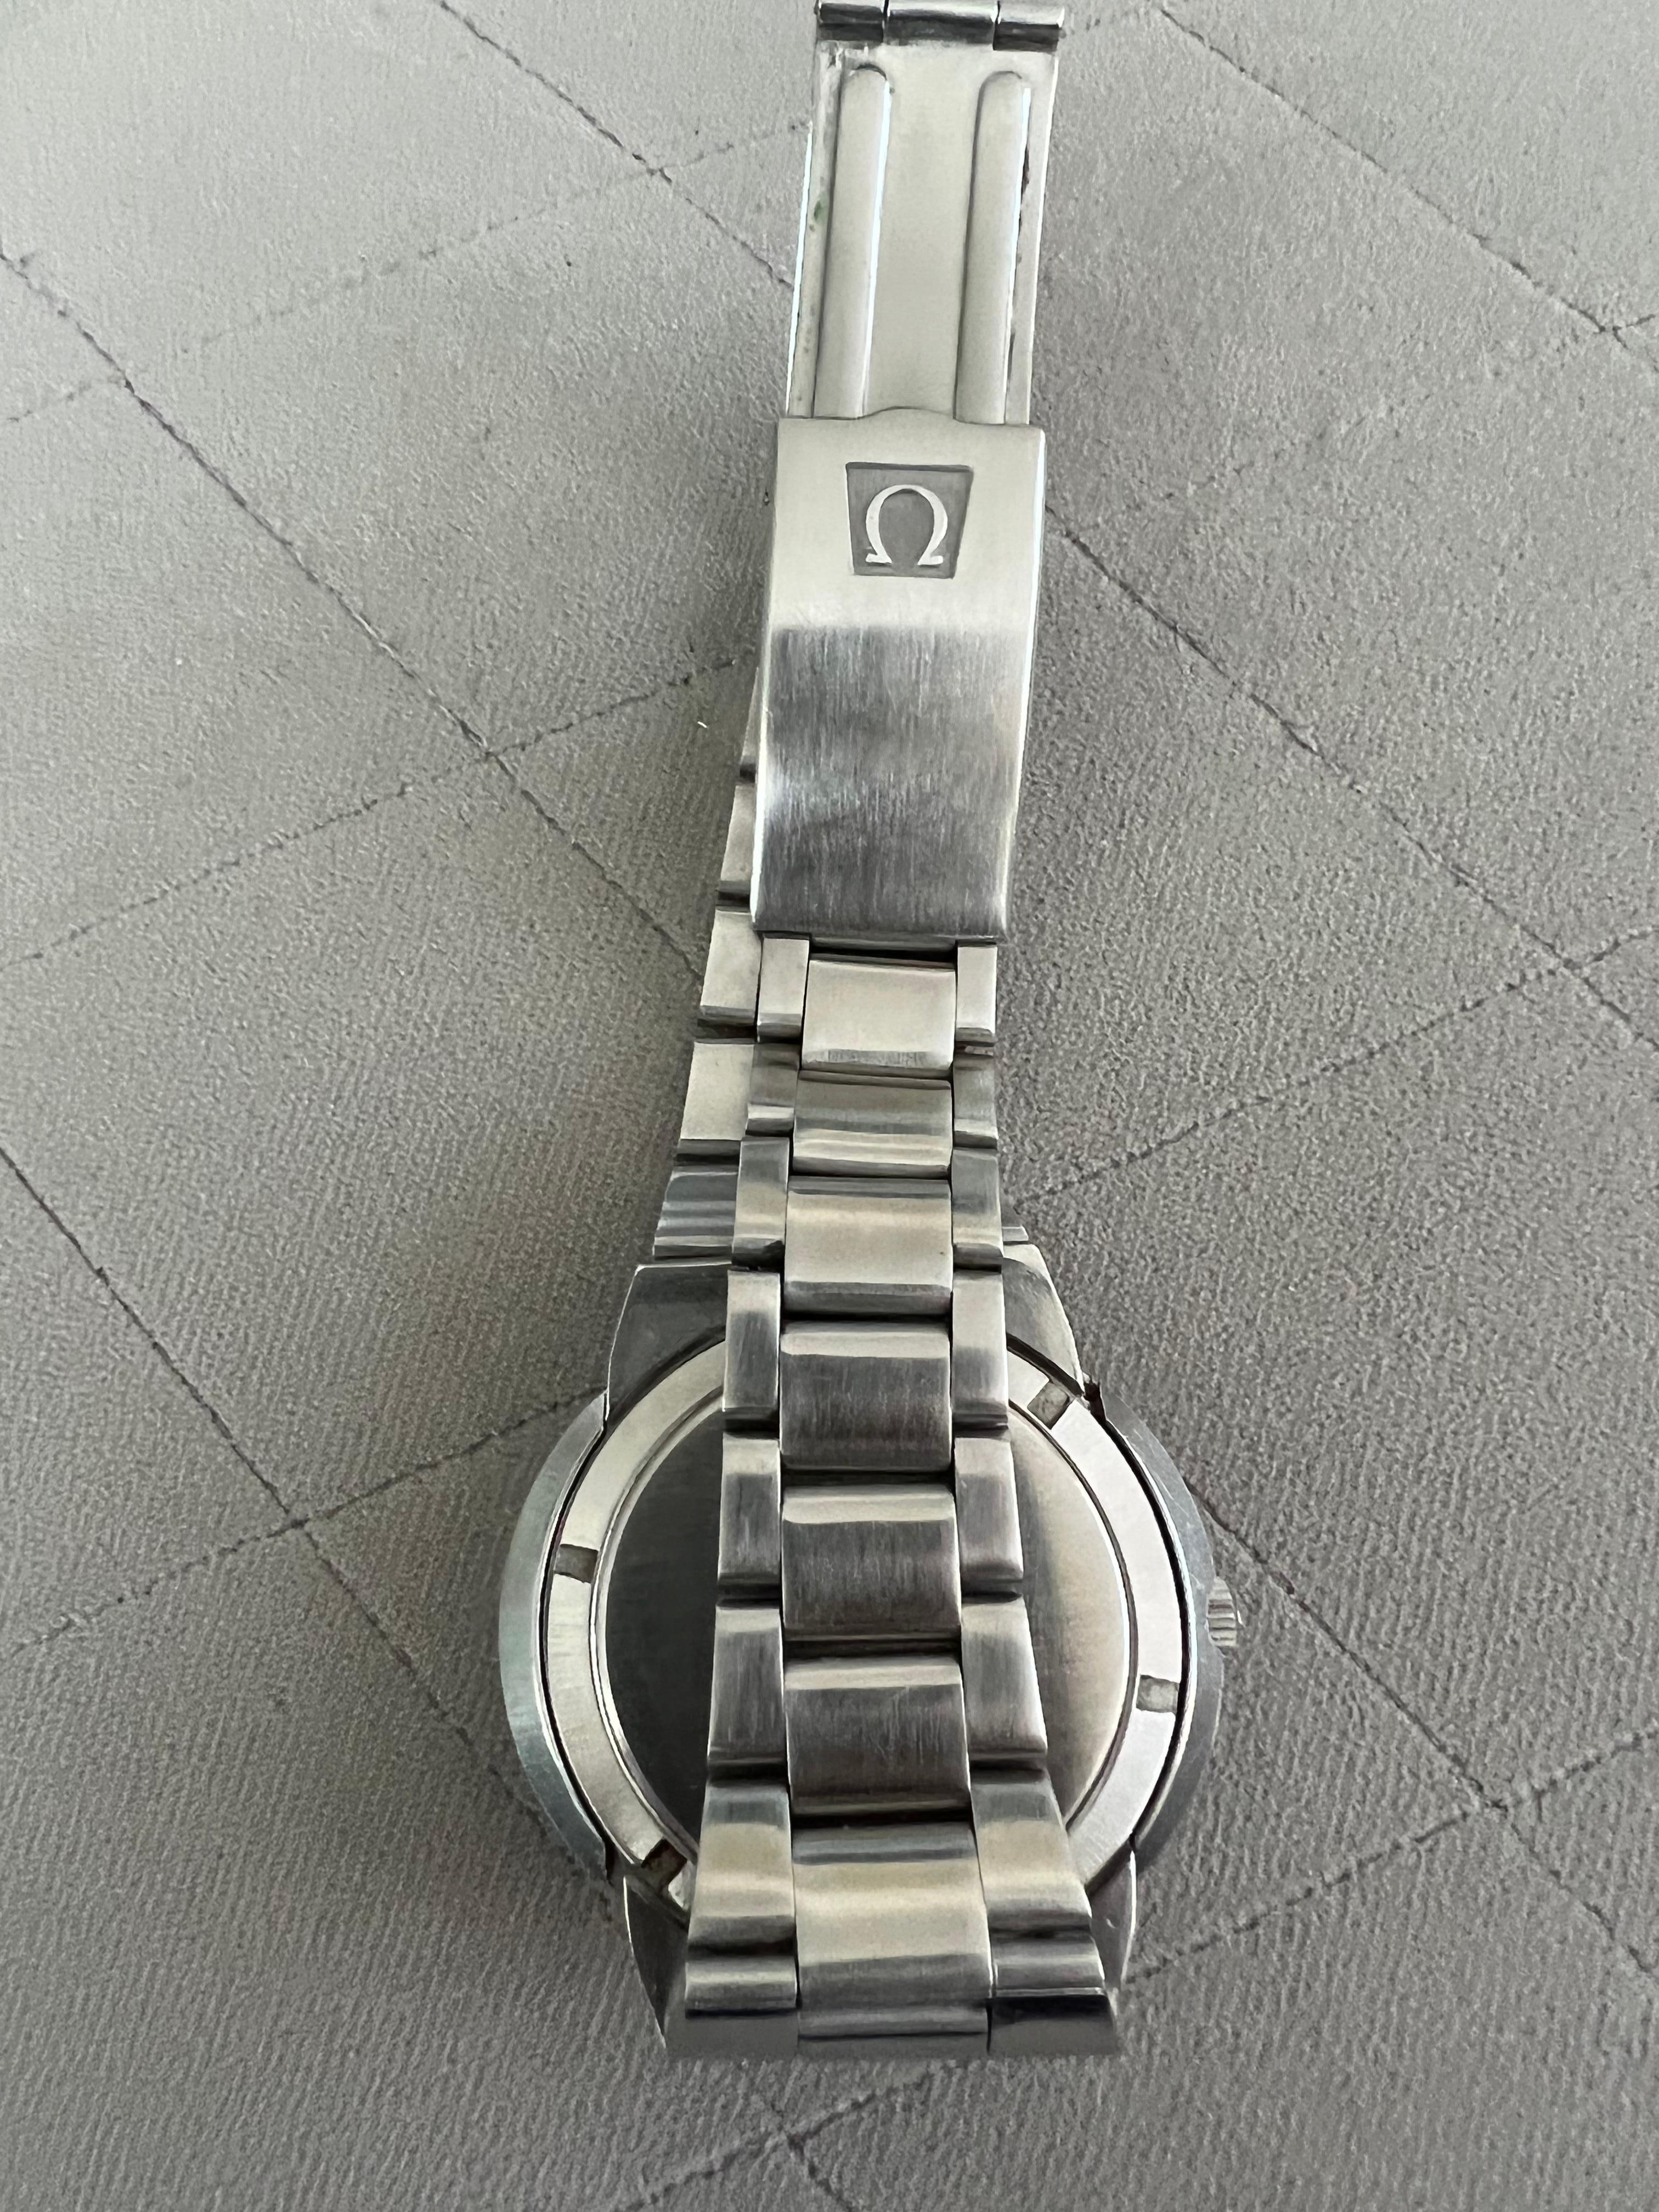 Artisan Omega Dynamic Vintage C. 1960s Watch W/ Tricolored Dial For Sale